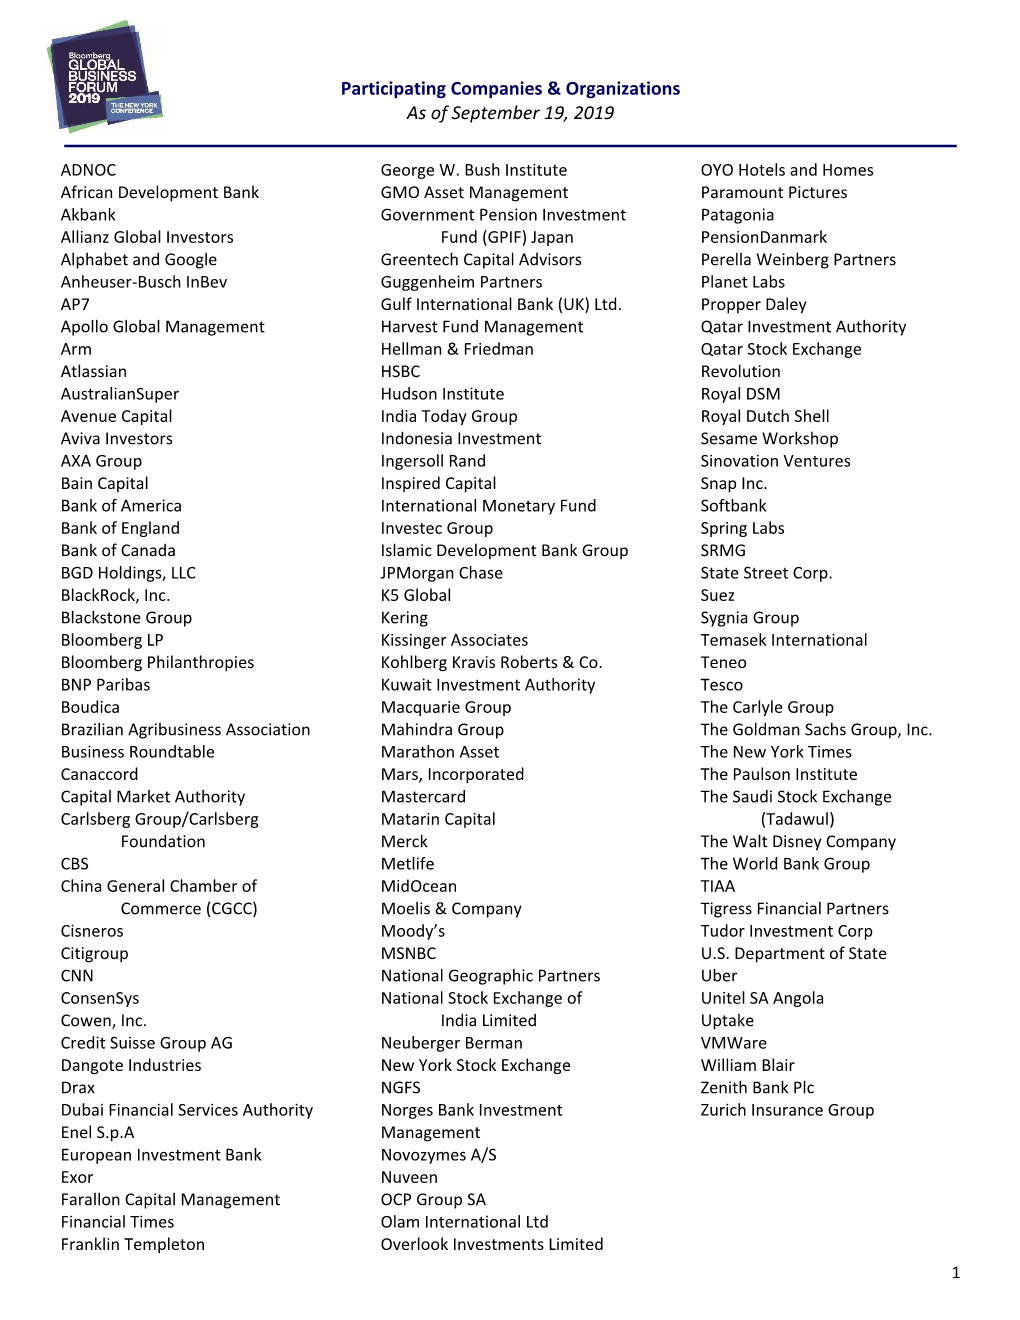 Participating Companies & Organizations As of September 19